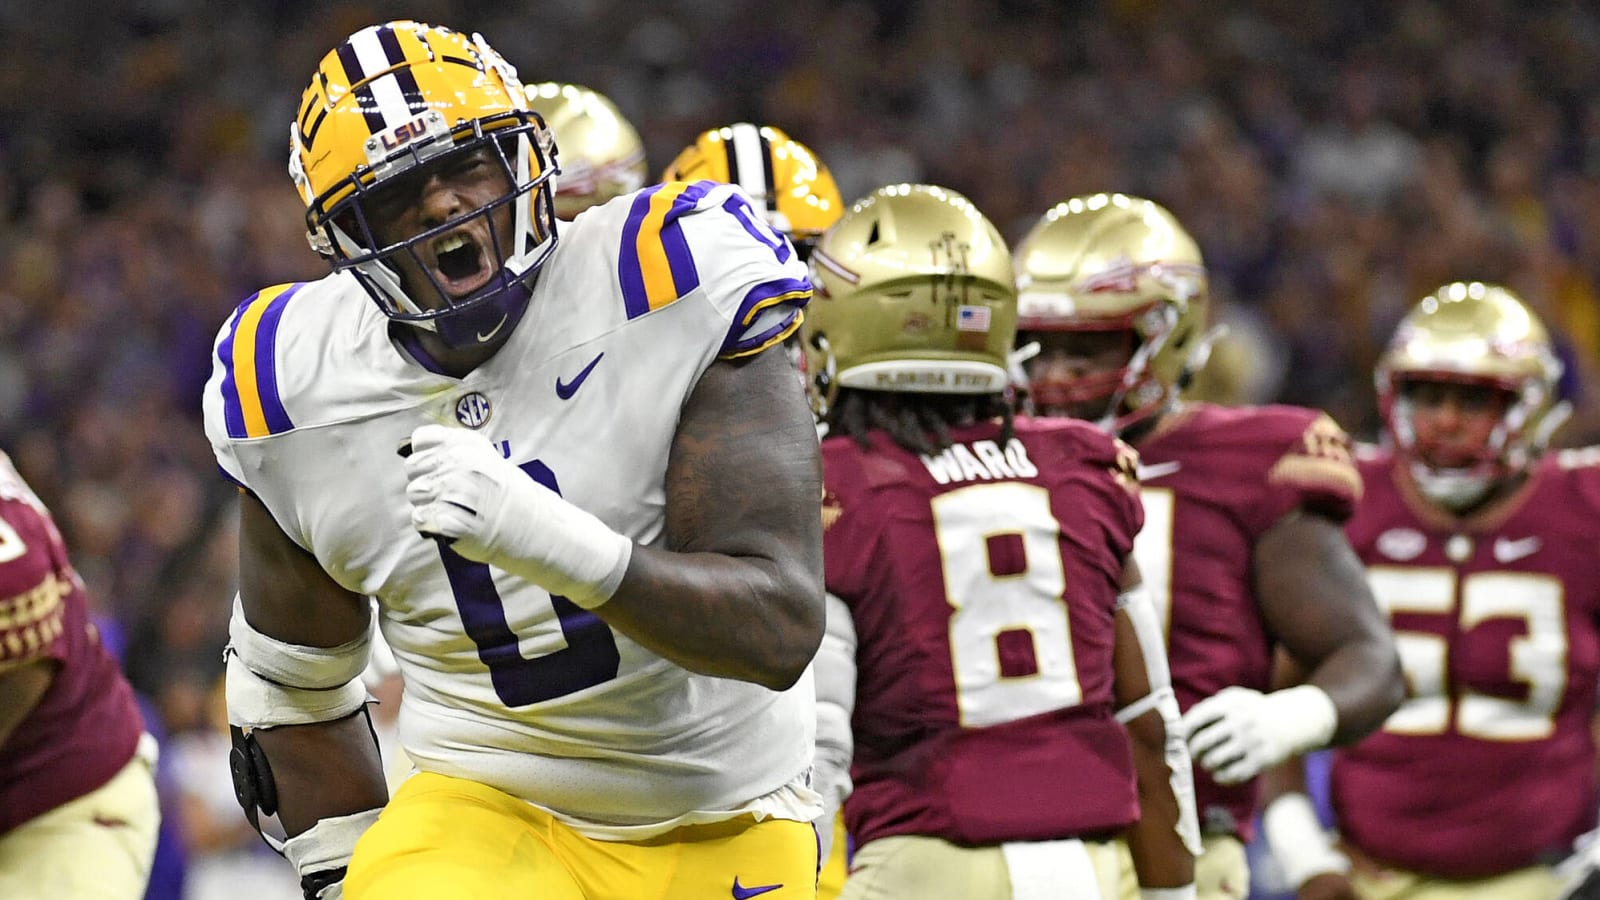 LSU DL Maason Smith tears ACL during celebration